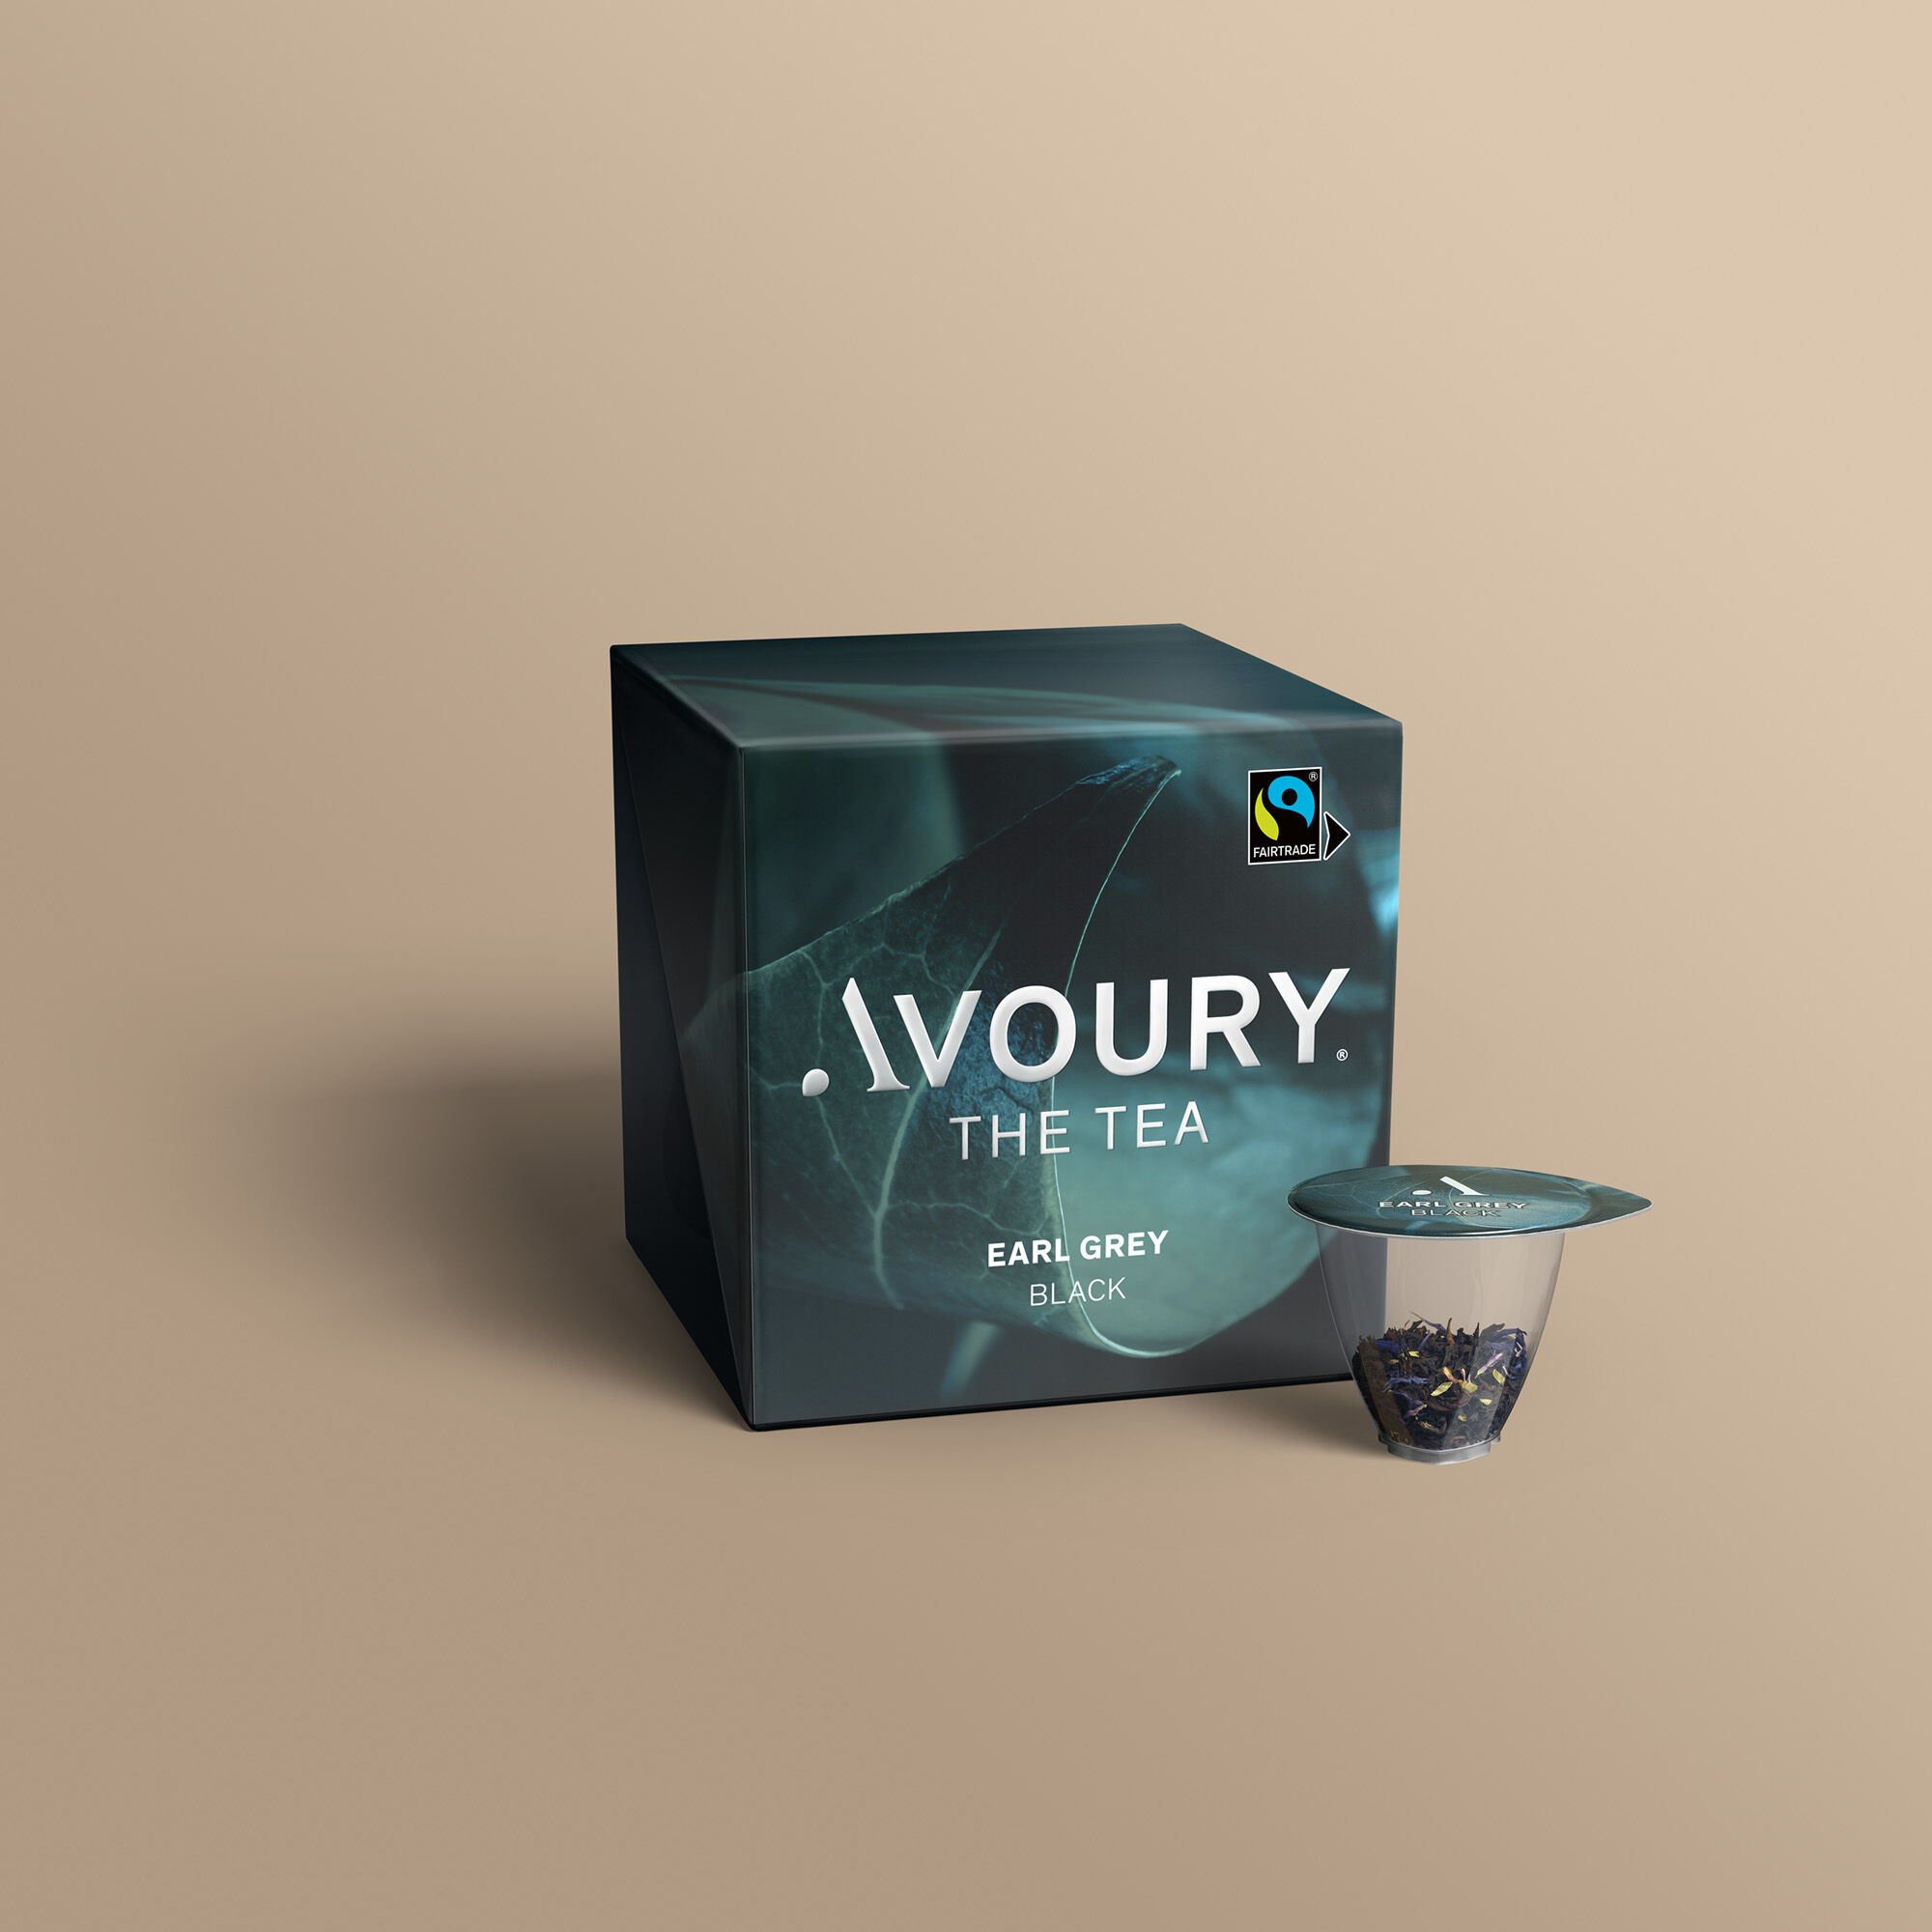 Avoury EARL GREY with a fairtrade seal 